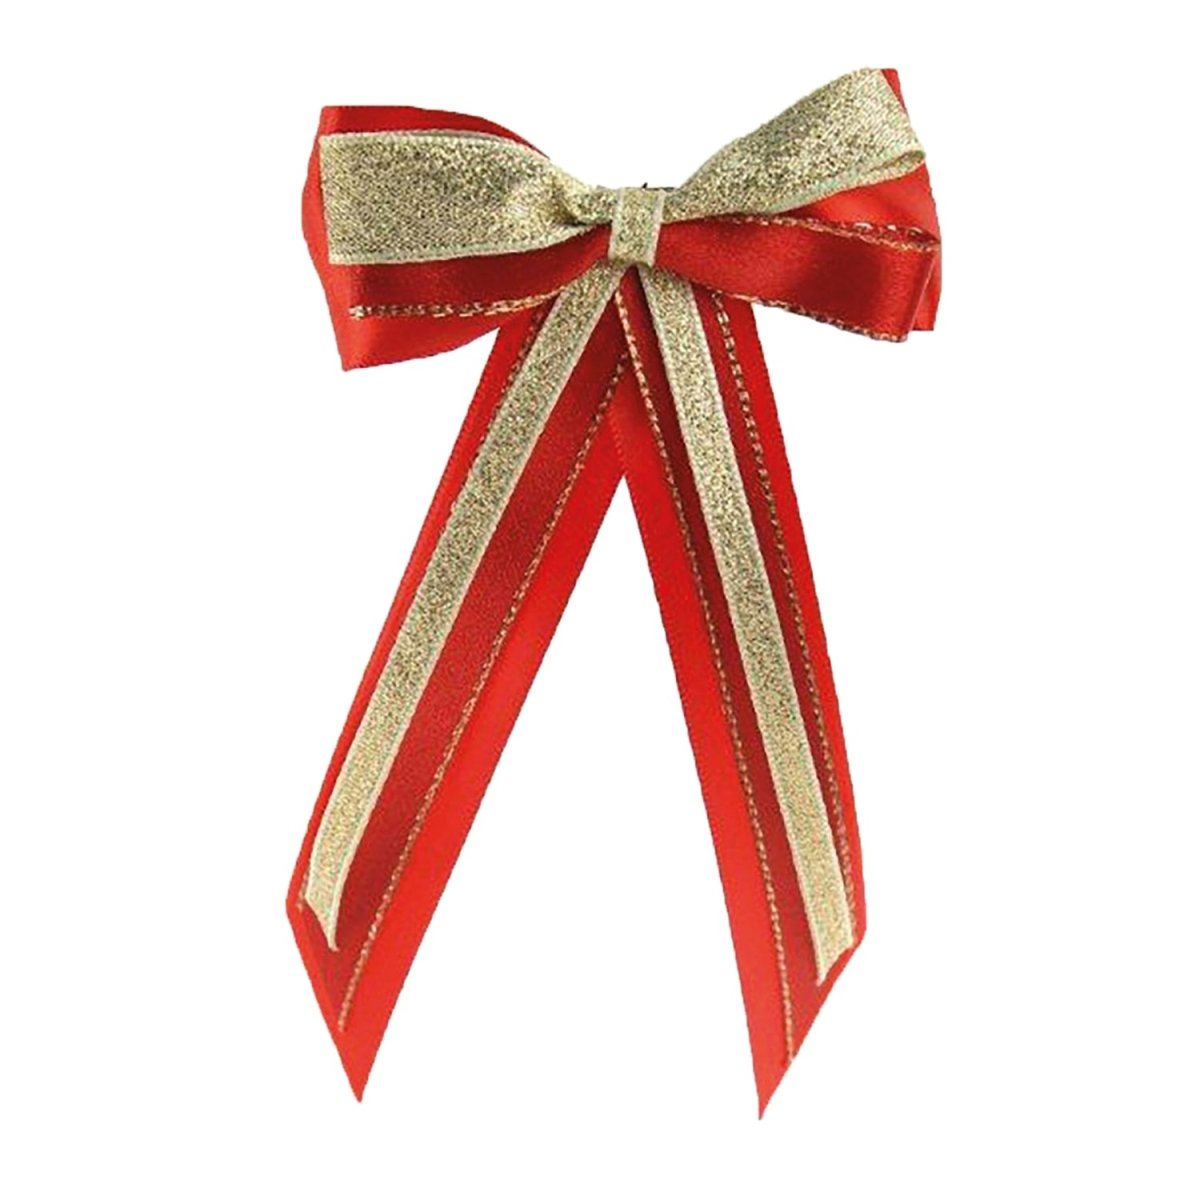 Showquest Hairbow & Tails - Red/Gold -